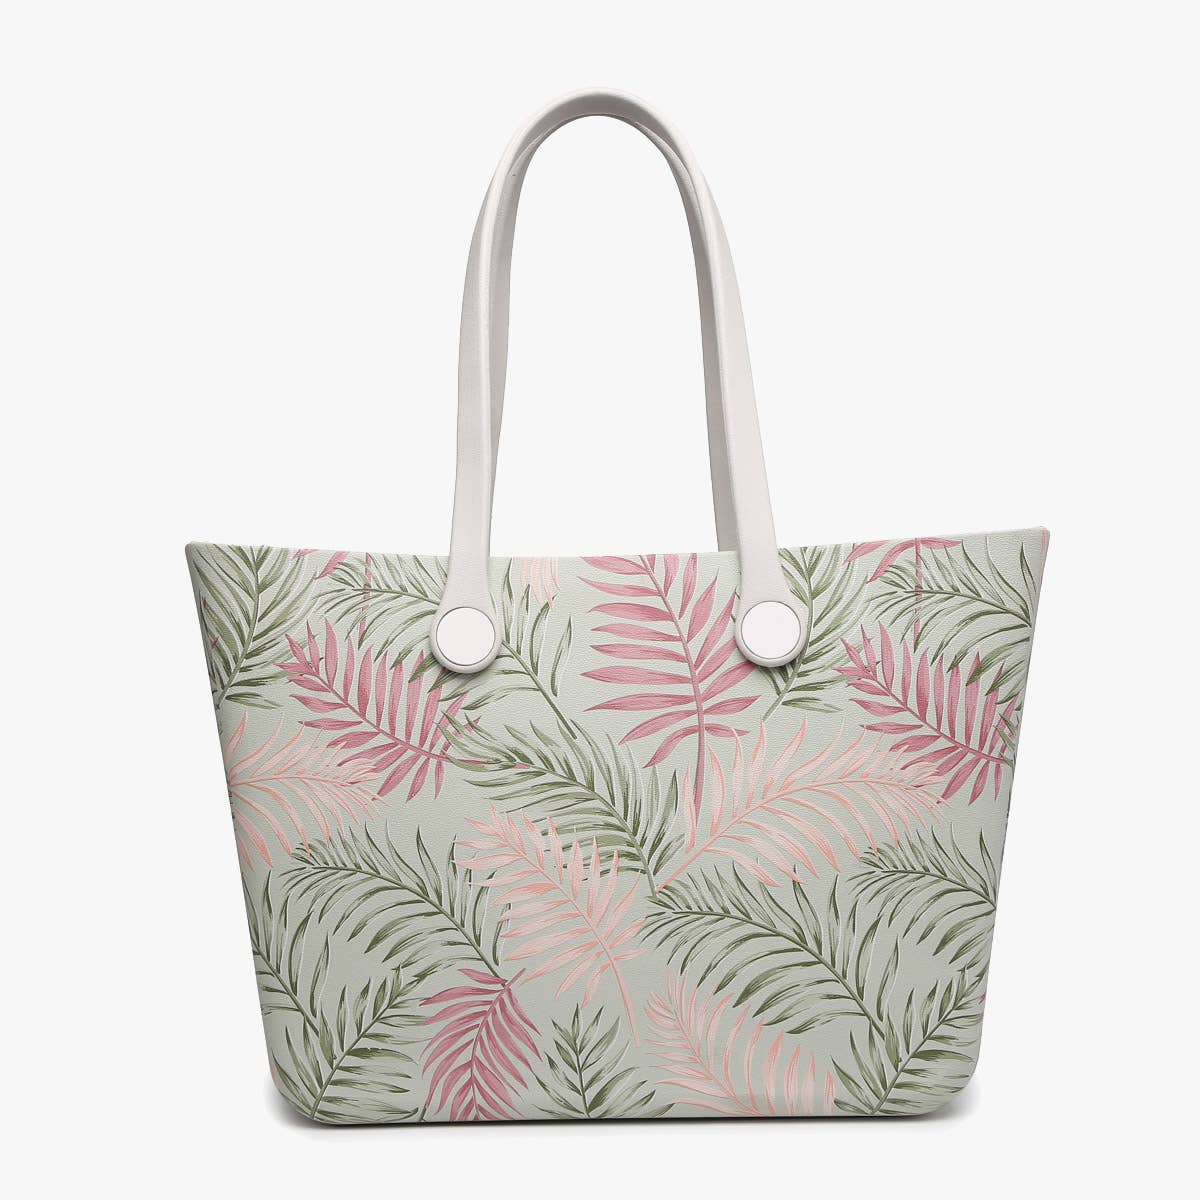 Carrie All Printed Versa Tote w/ Straps